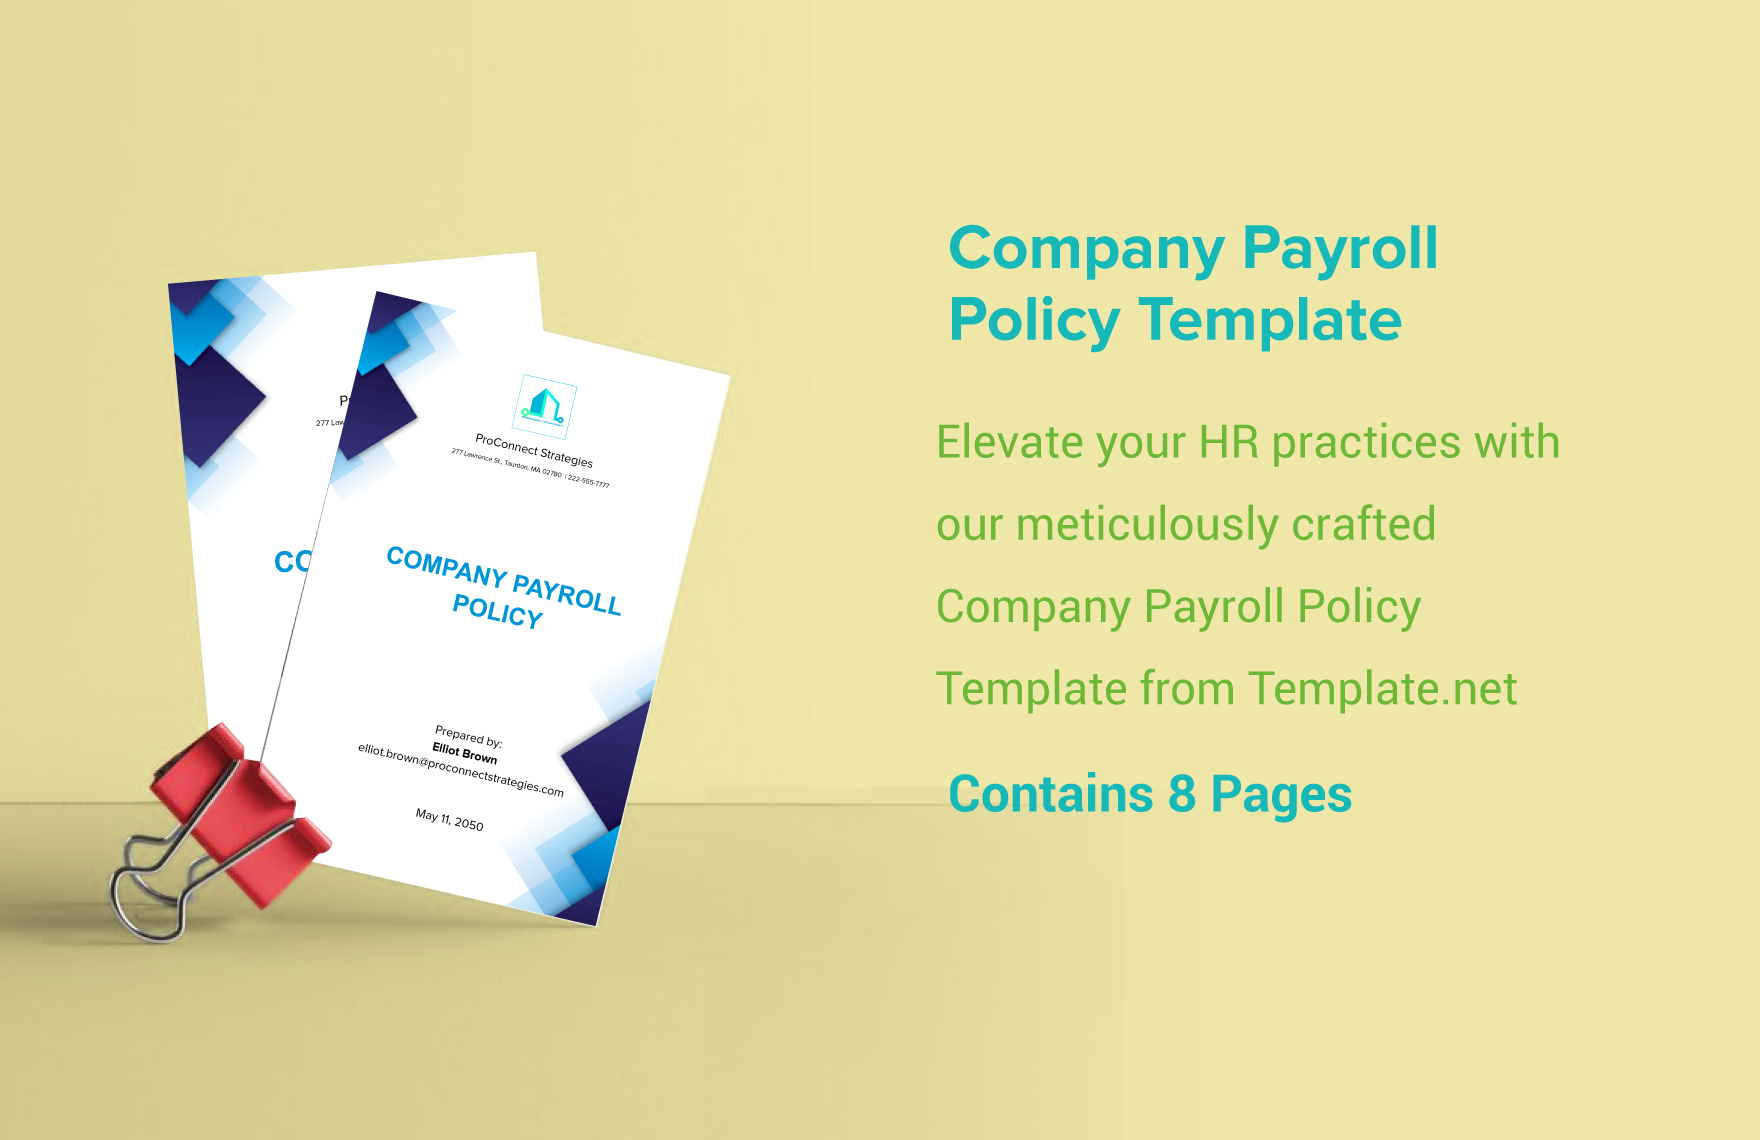 Company Payroll Policy Template